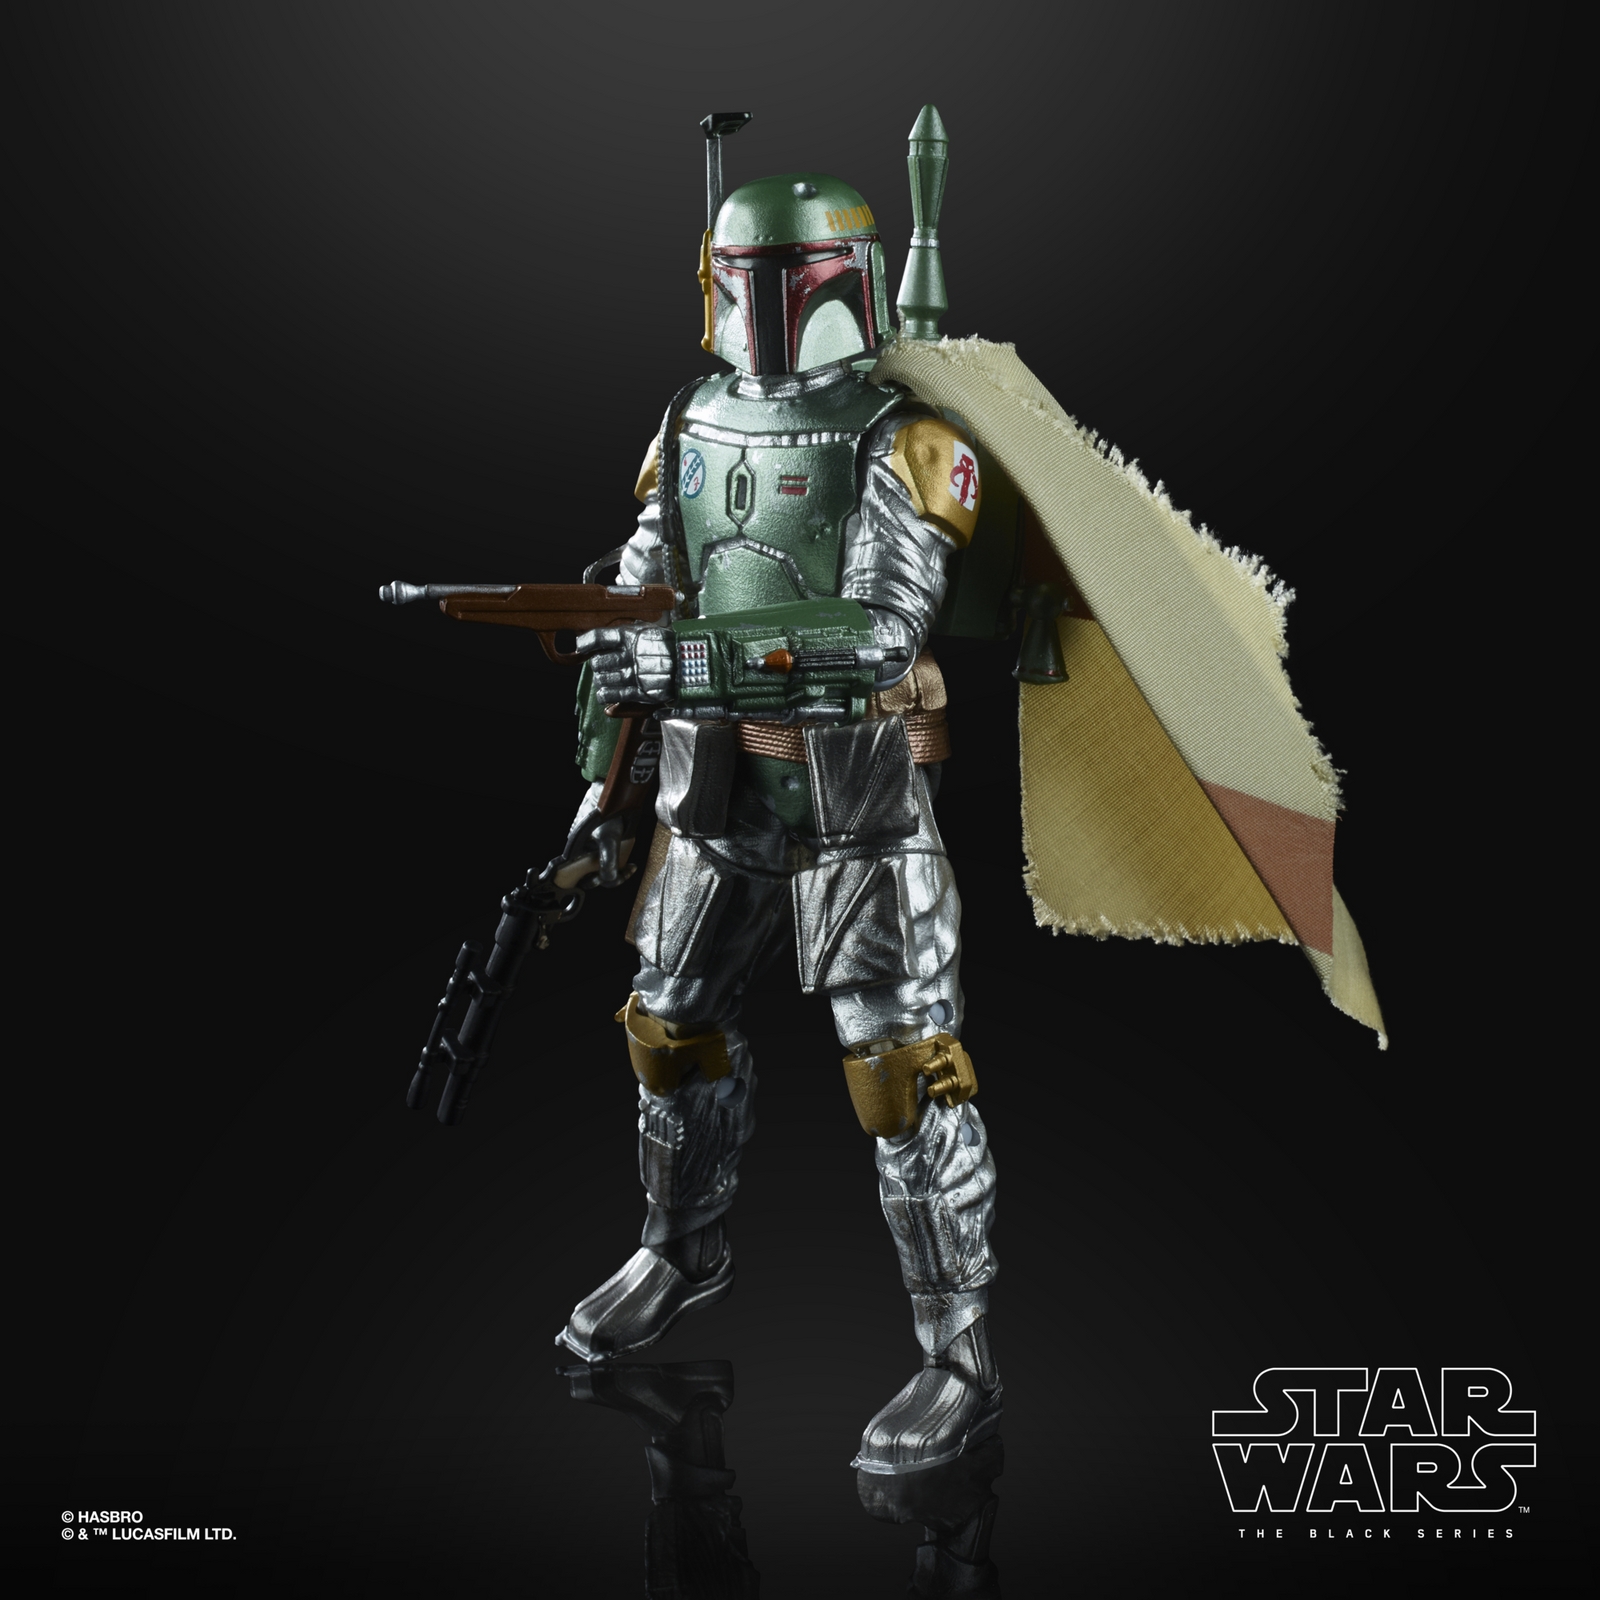 STAR WARS THE BLACK CARBONIZED COLLECTION 6-INCH BOBA FETT Figure - oop (1).jpg